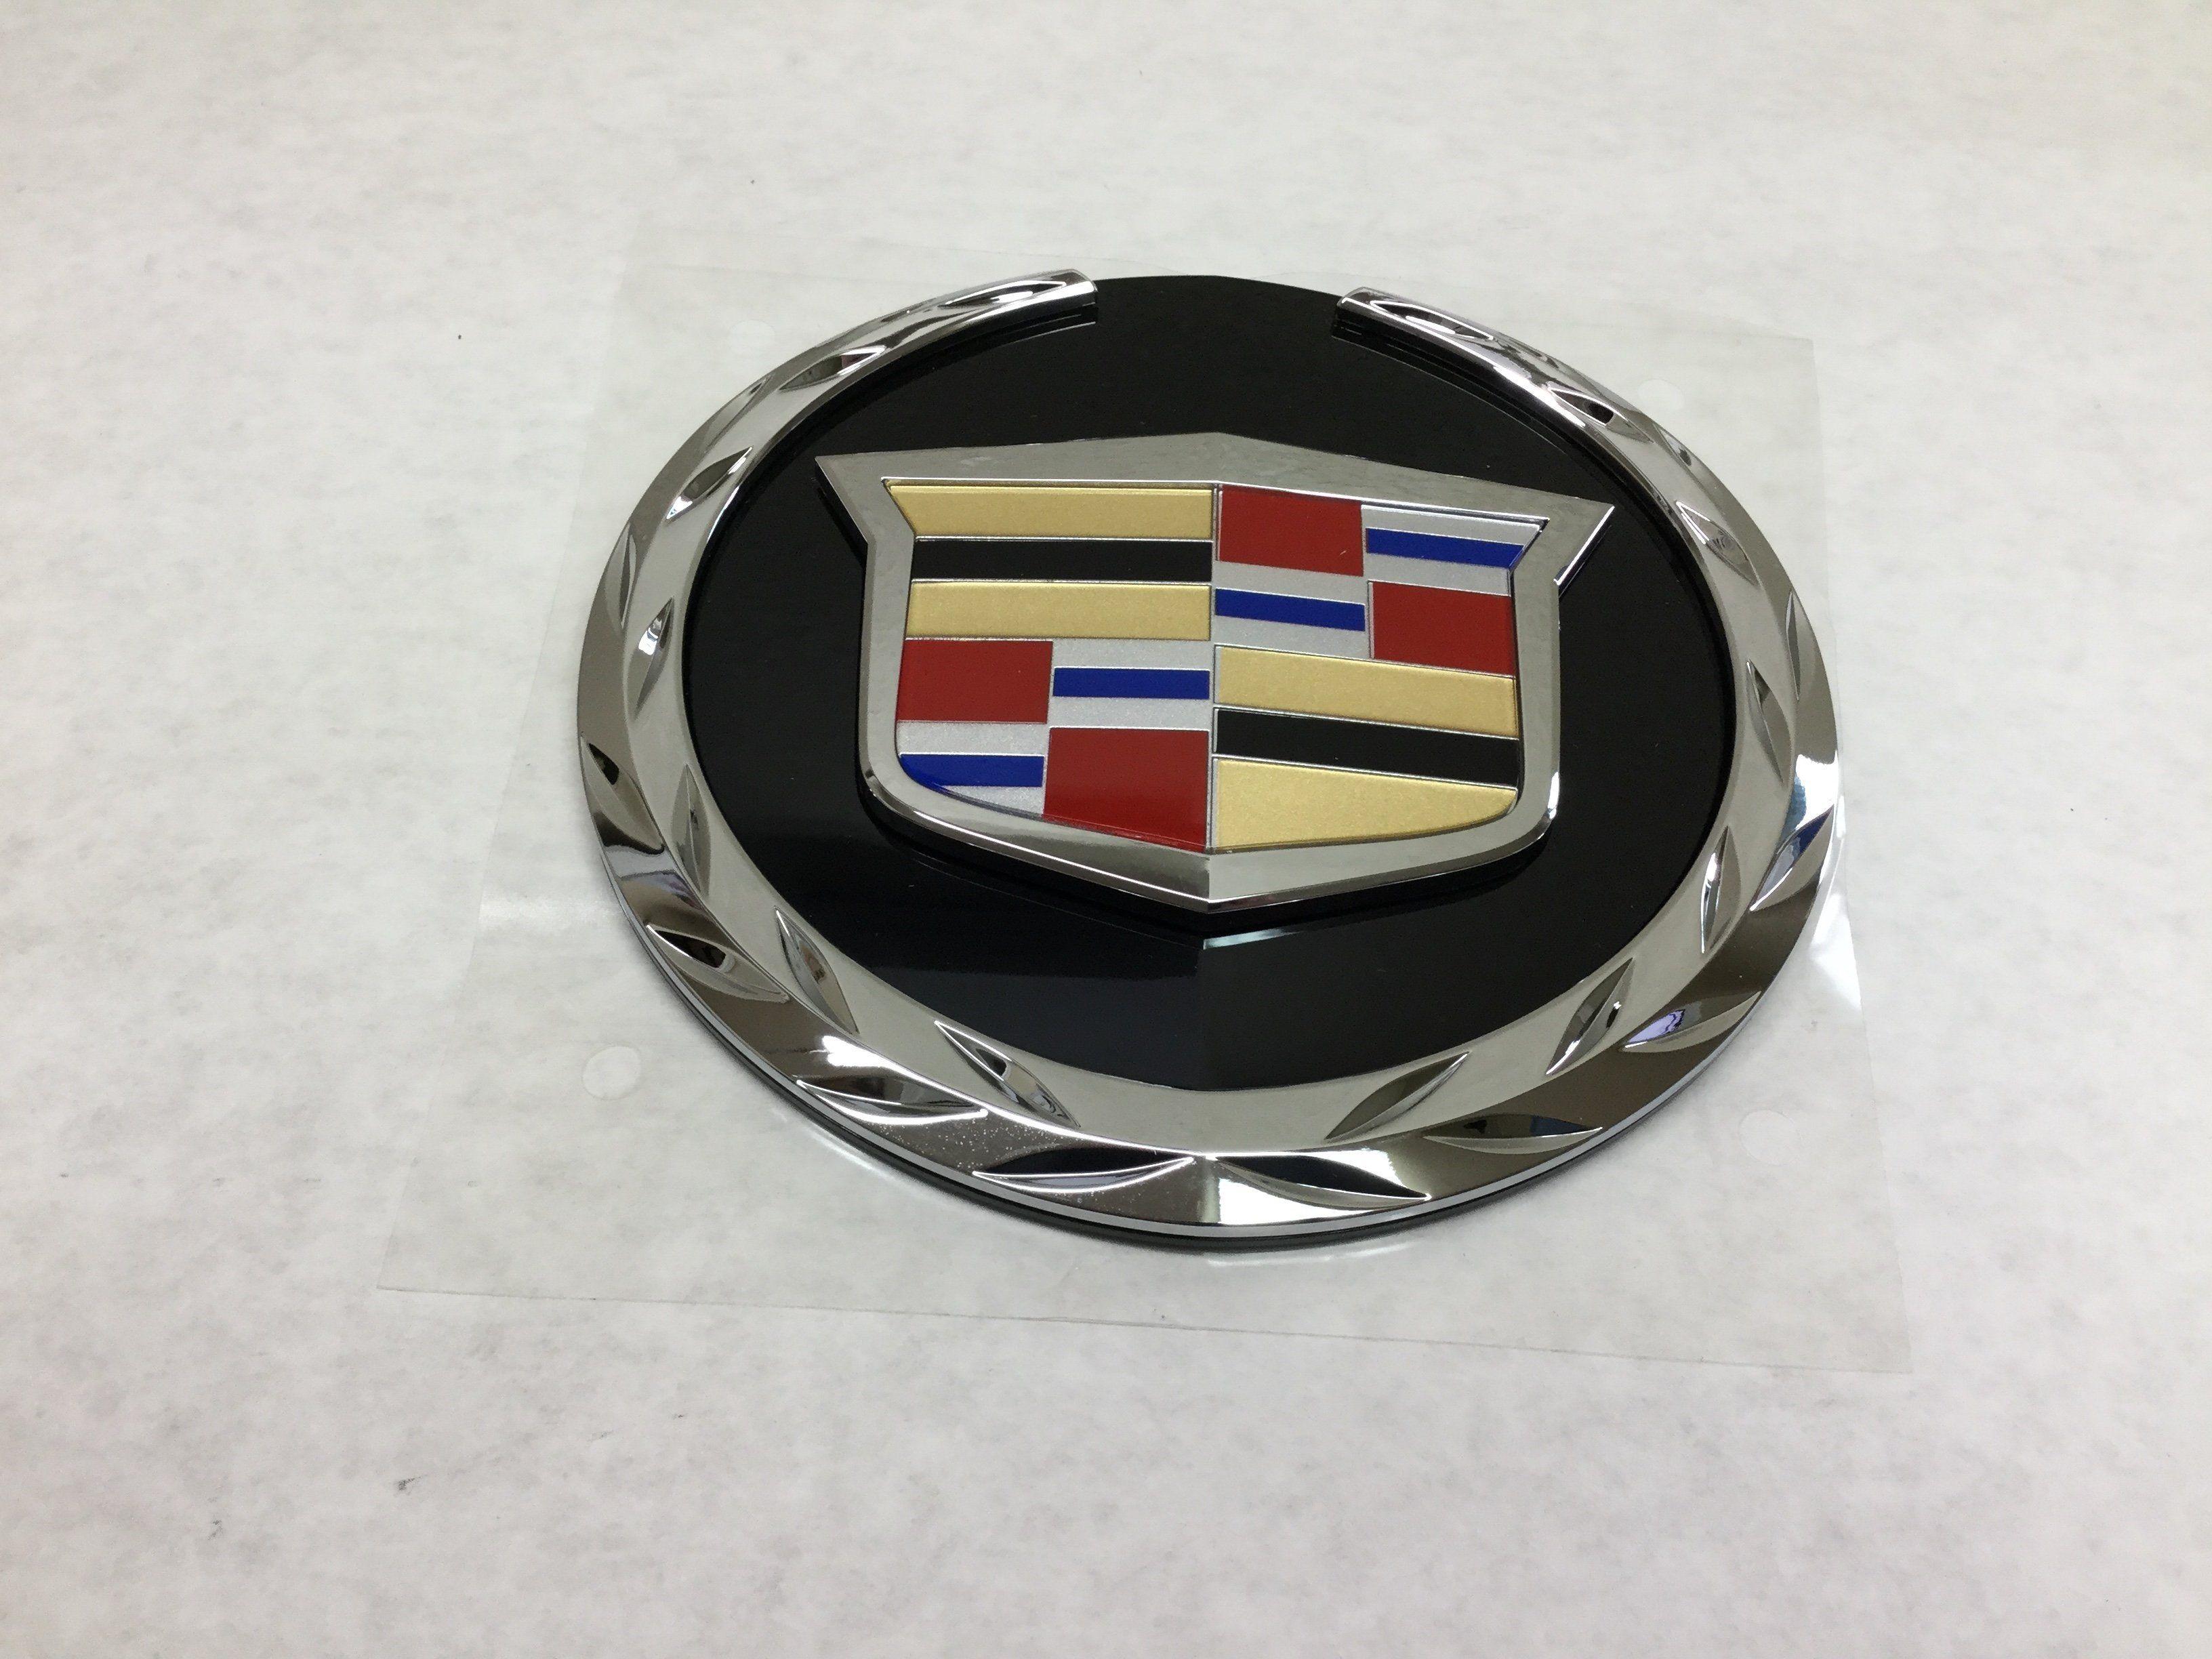 2014 New Cadillac Logo - New 2007-2014 Cadillac Escalade Front Grille Crest And Wreath ...